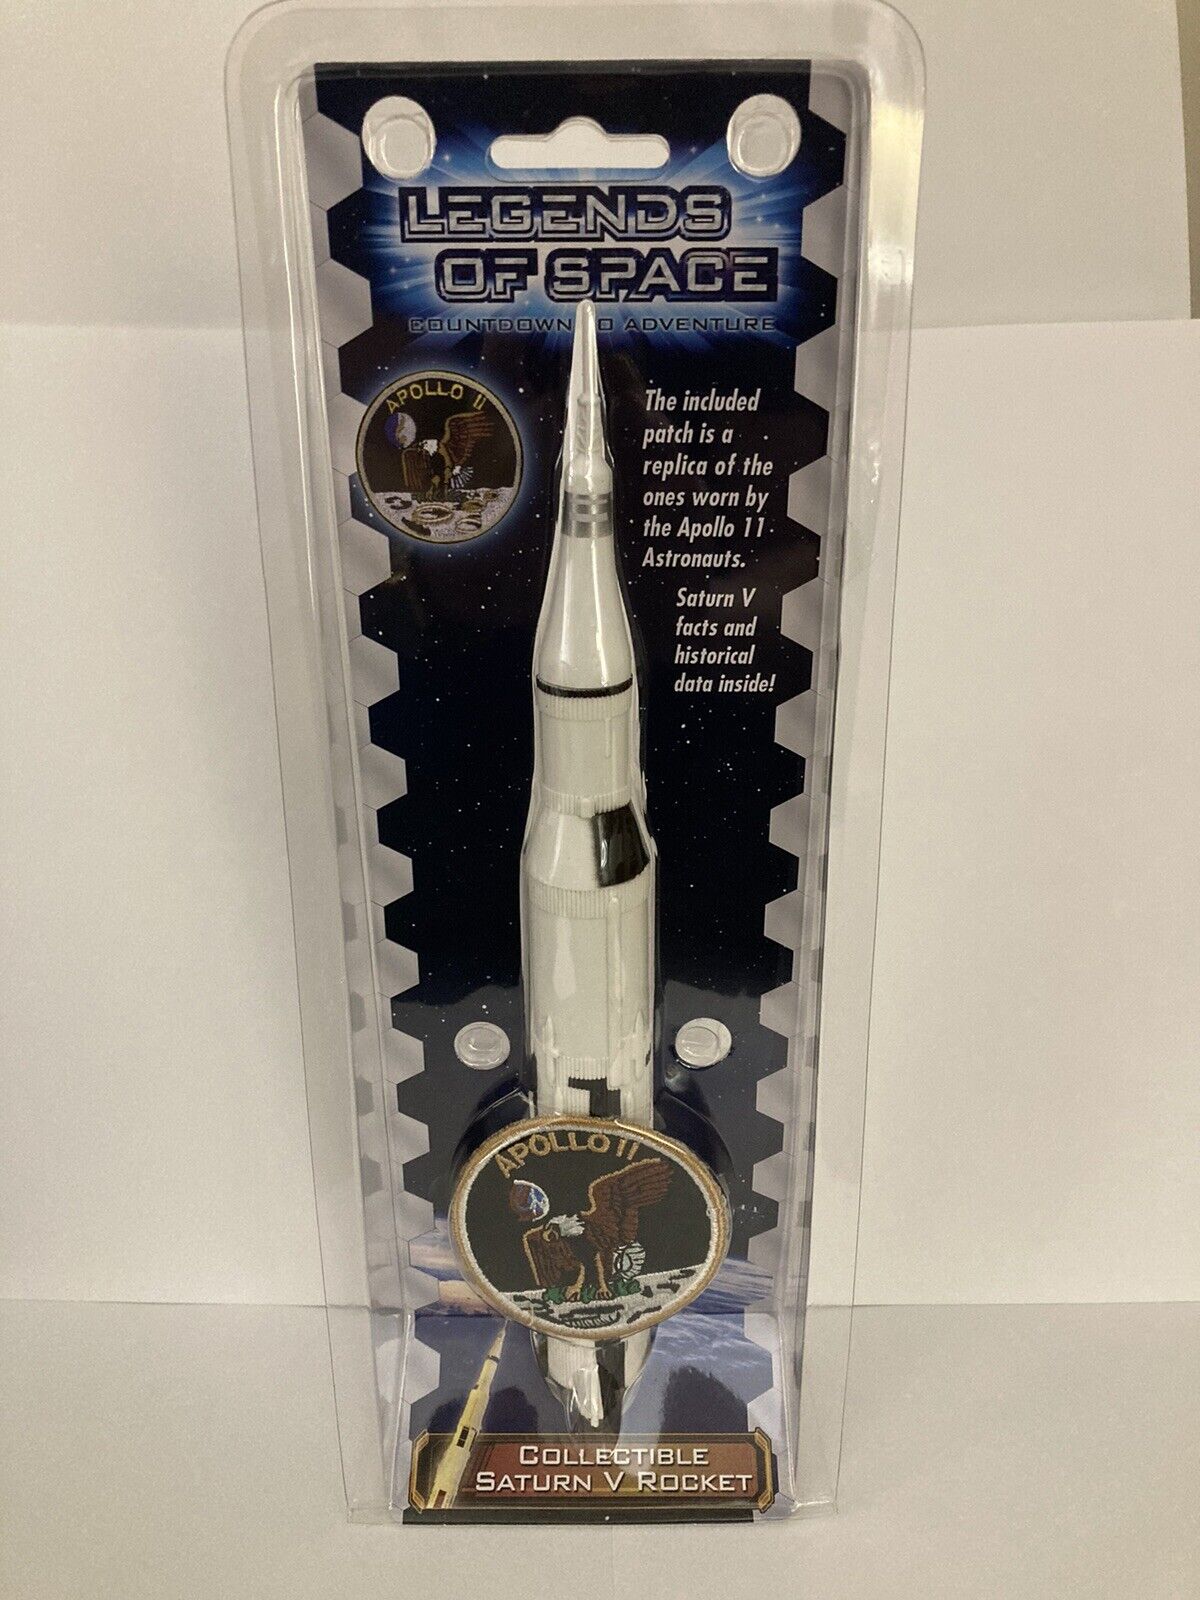 ECHO TOYS LEGENDS of SPACE Collectable Saturn V Apollo Moon Rocket, NEW